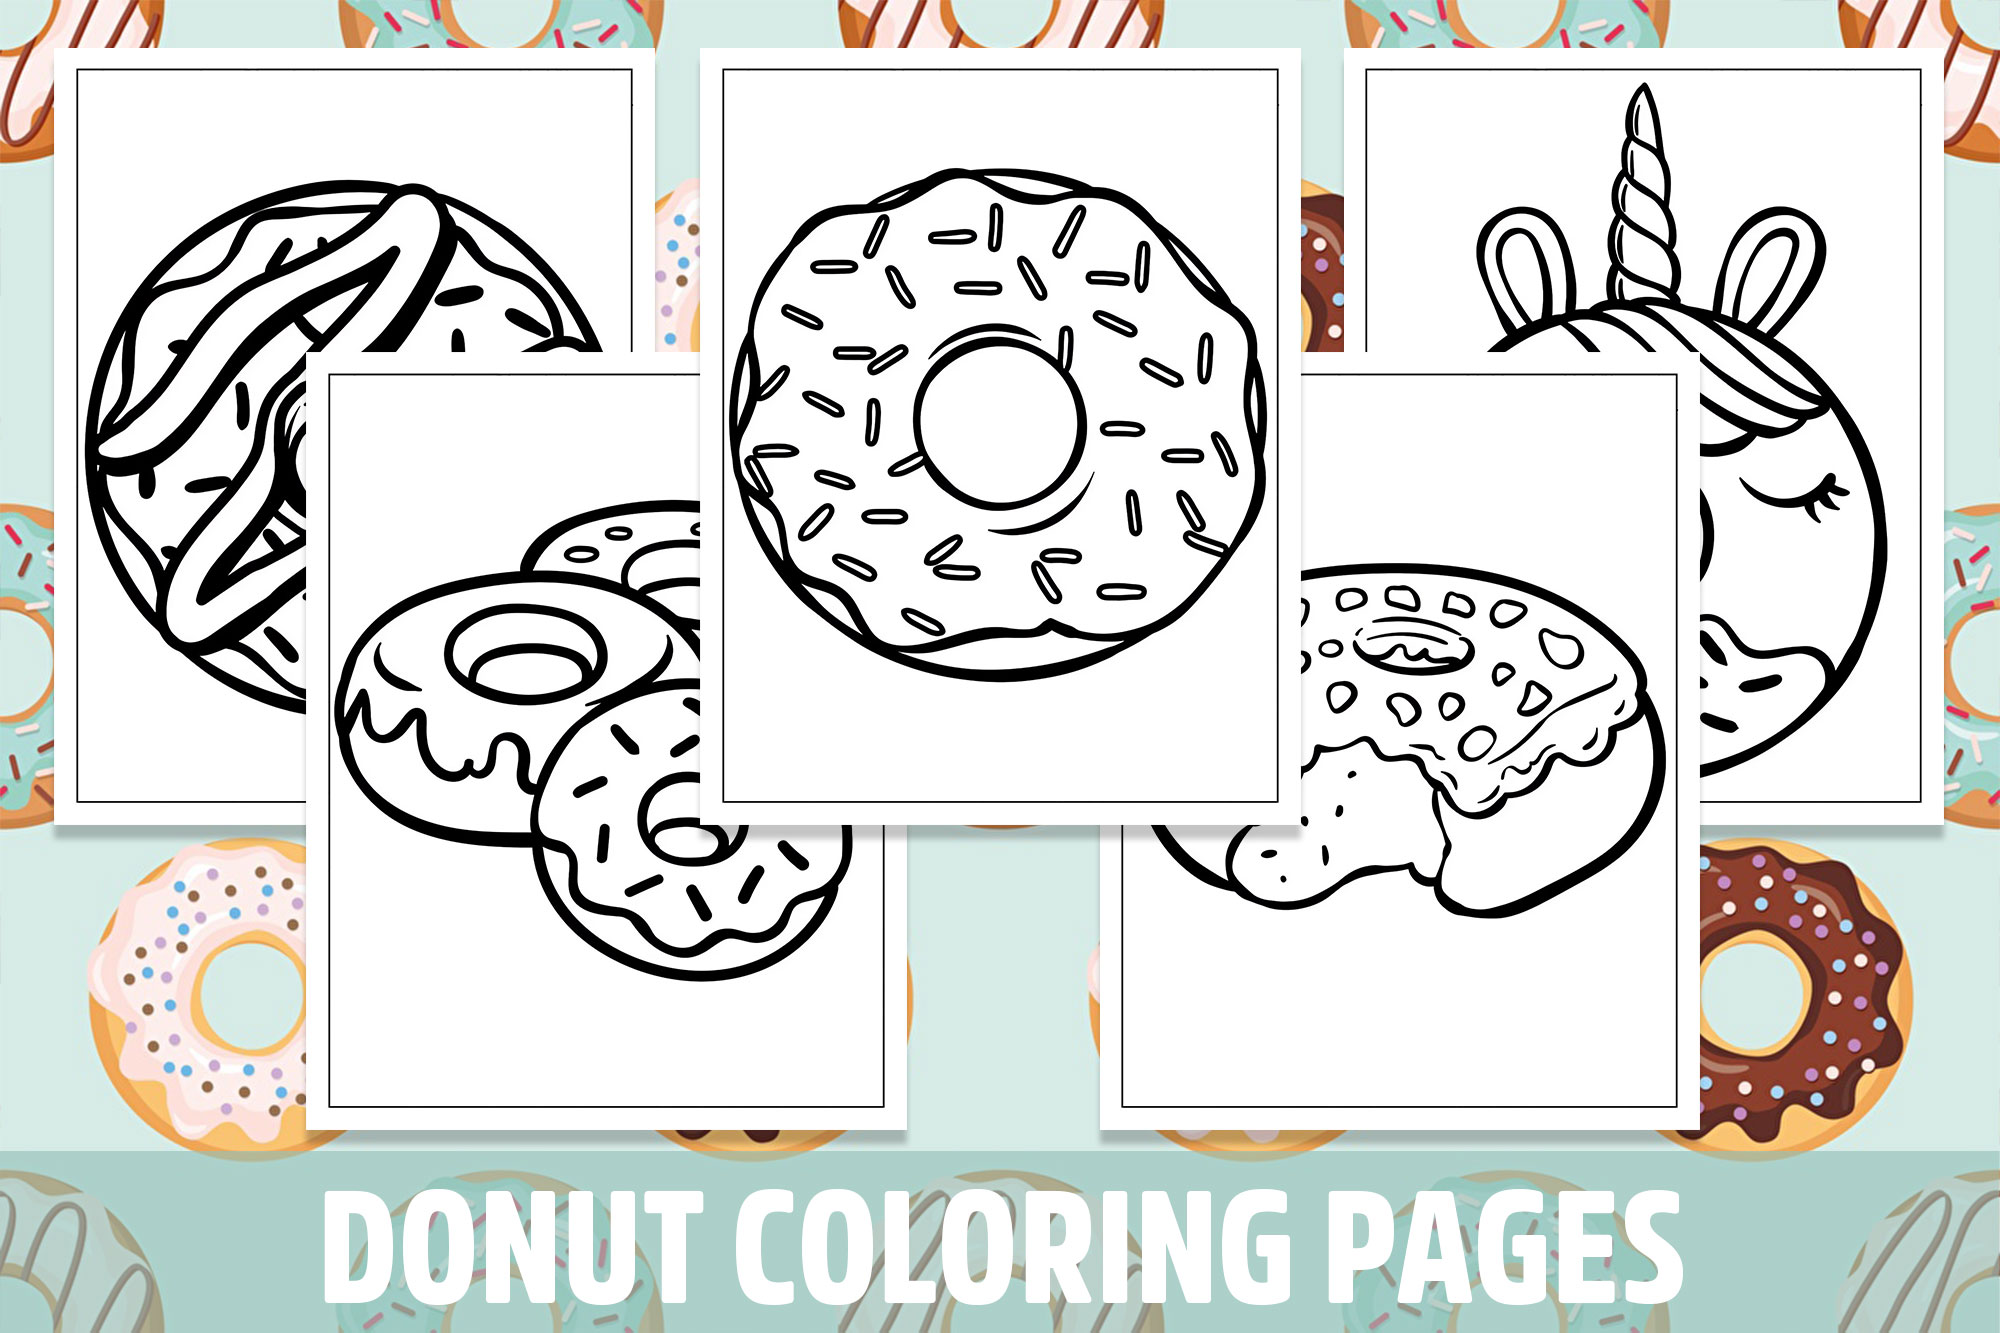 Donut coloring pages for kids girls boys teens birthday school activity made by teachers